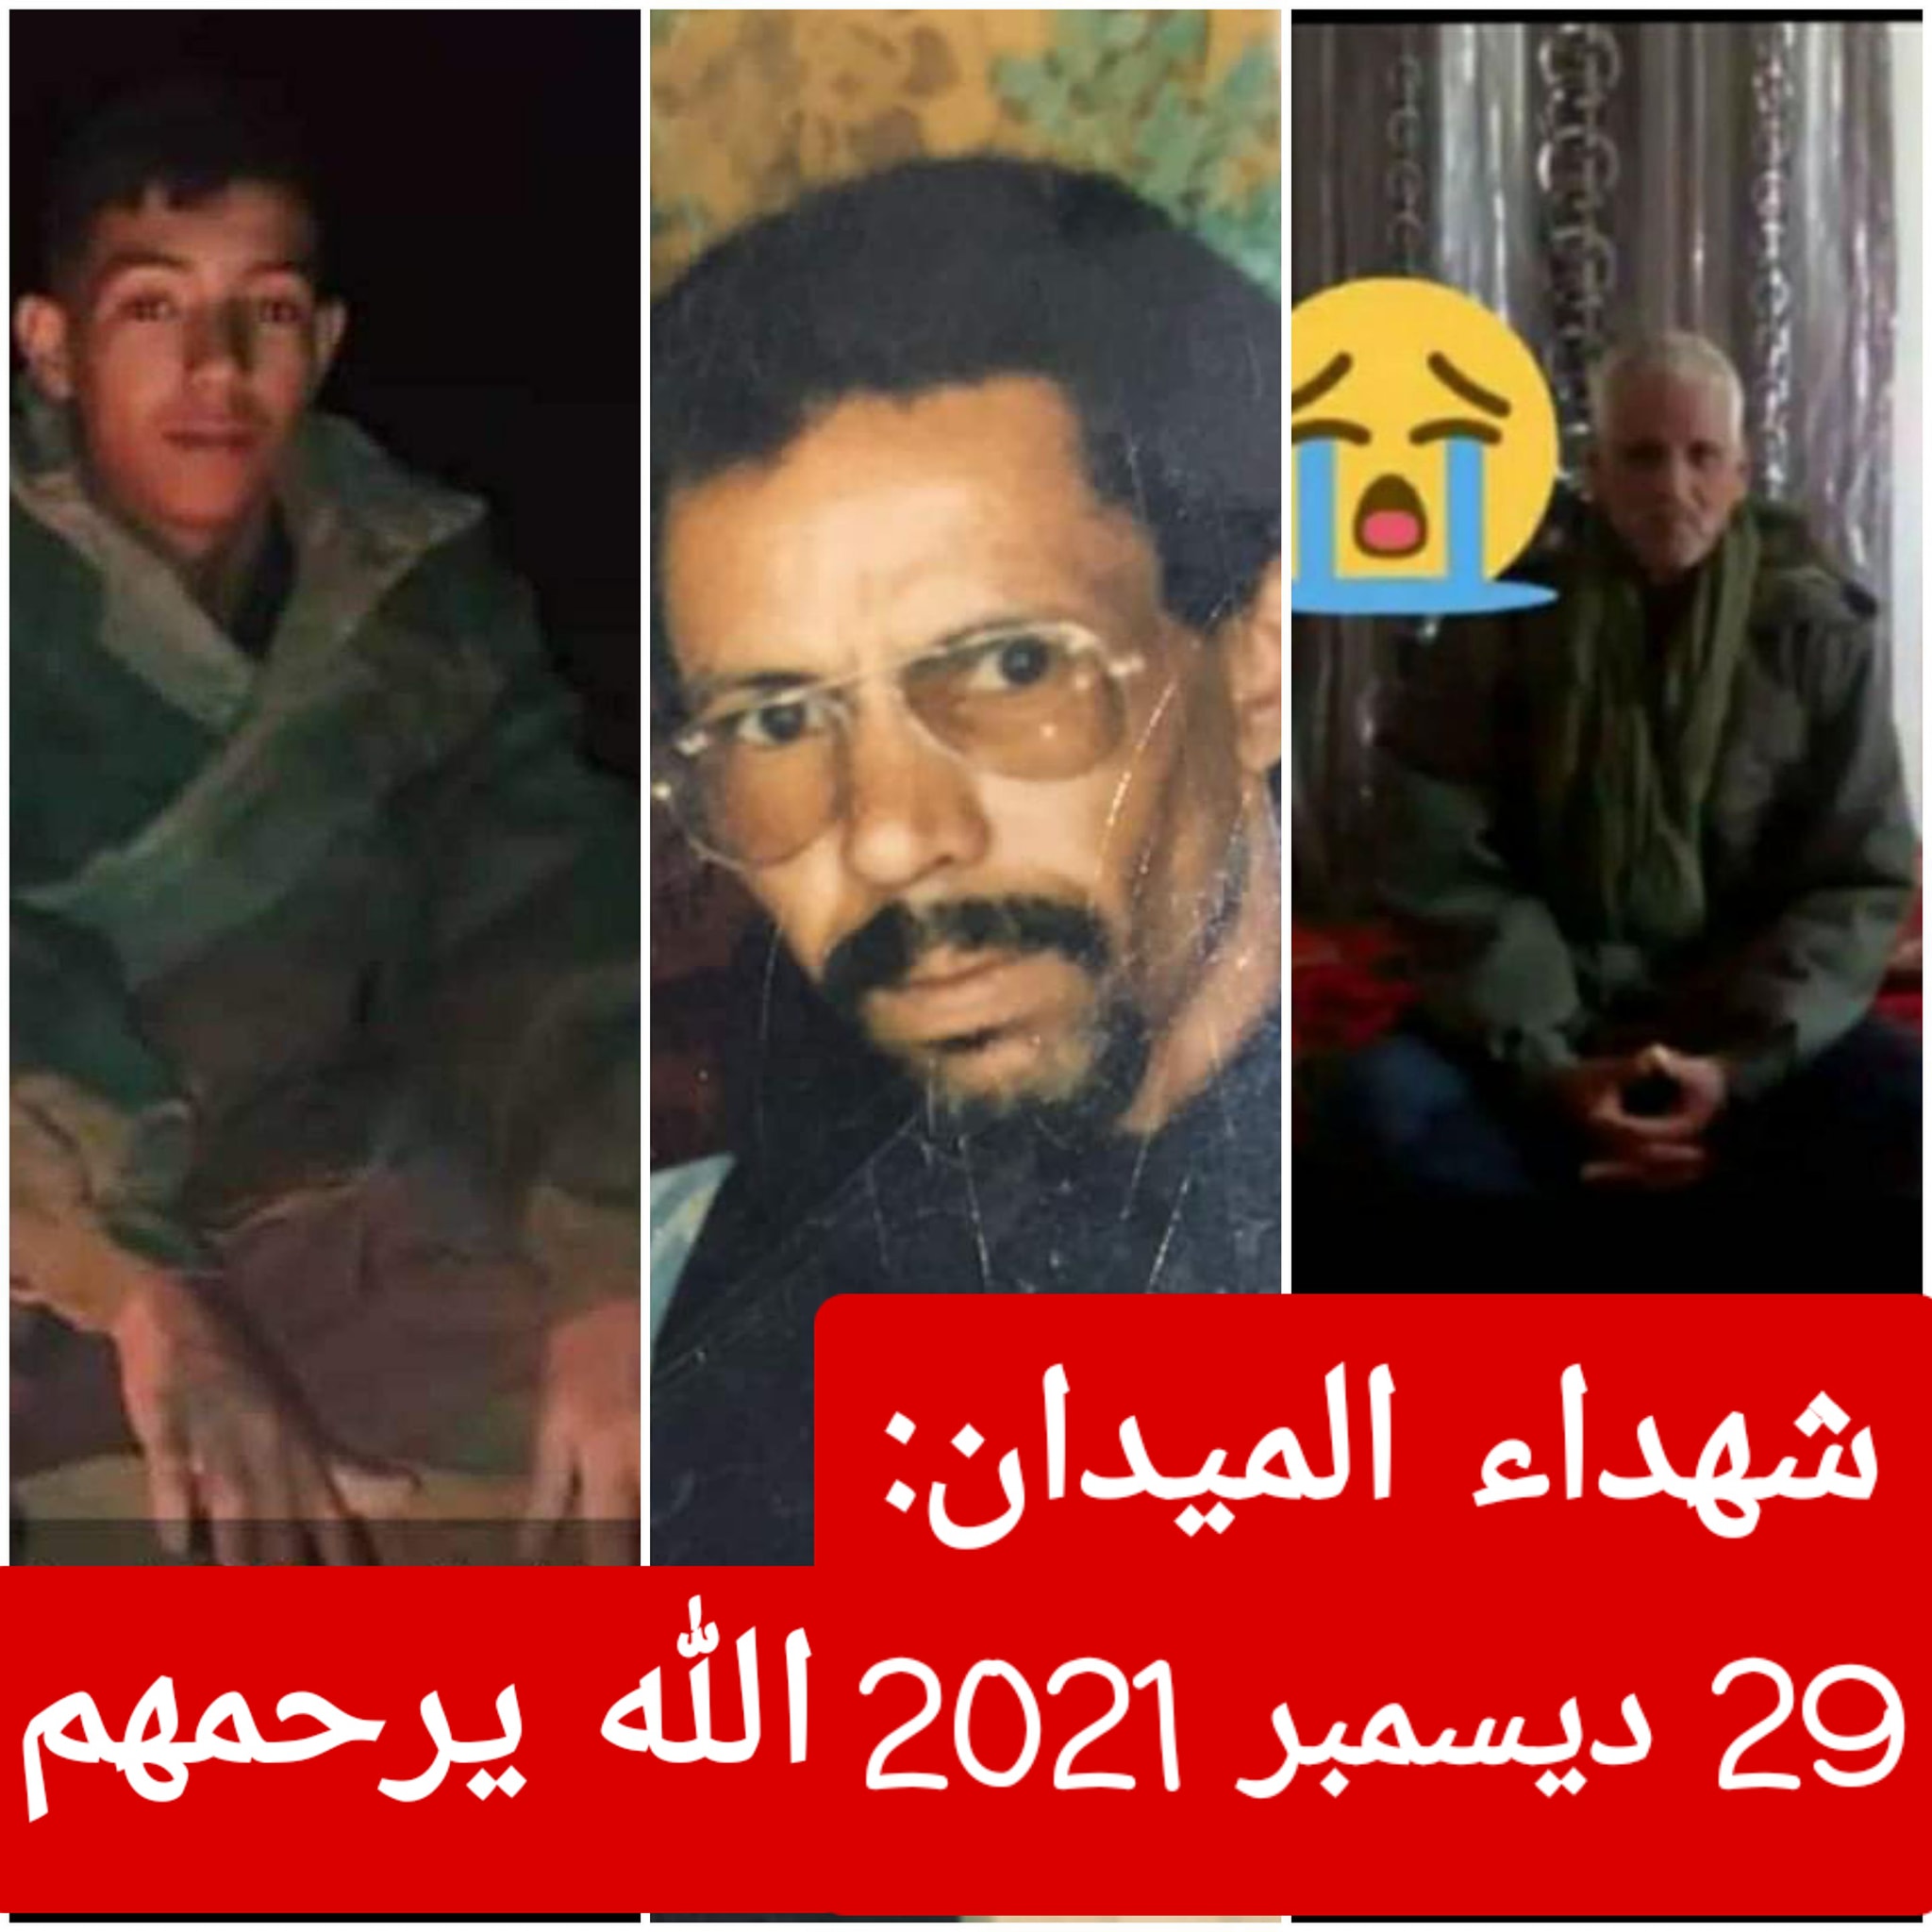 May be an image of ‎3 people and ‎text that says '‎可 شهداء :الميدان 29 ديسمبر 2021 الله يرحمهم‎'‎‎